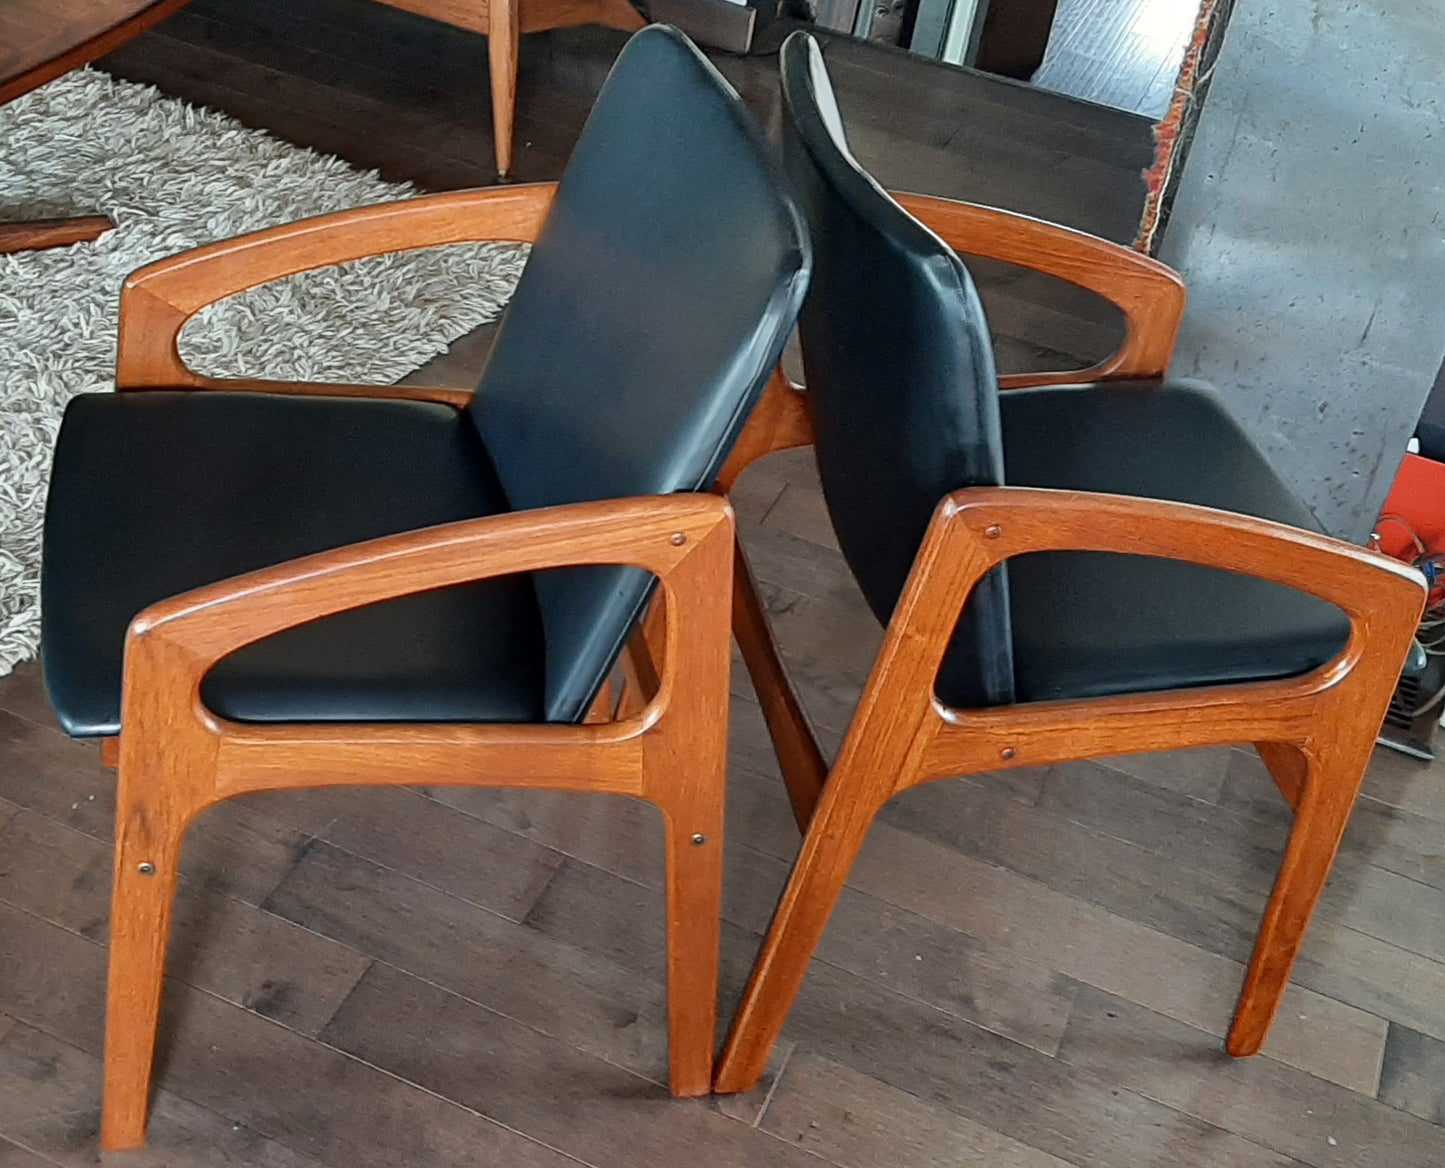 2 REFINISHED REUPHOLSTERED Danish MCM Angled Arm Chairs by H. Kjaernulf